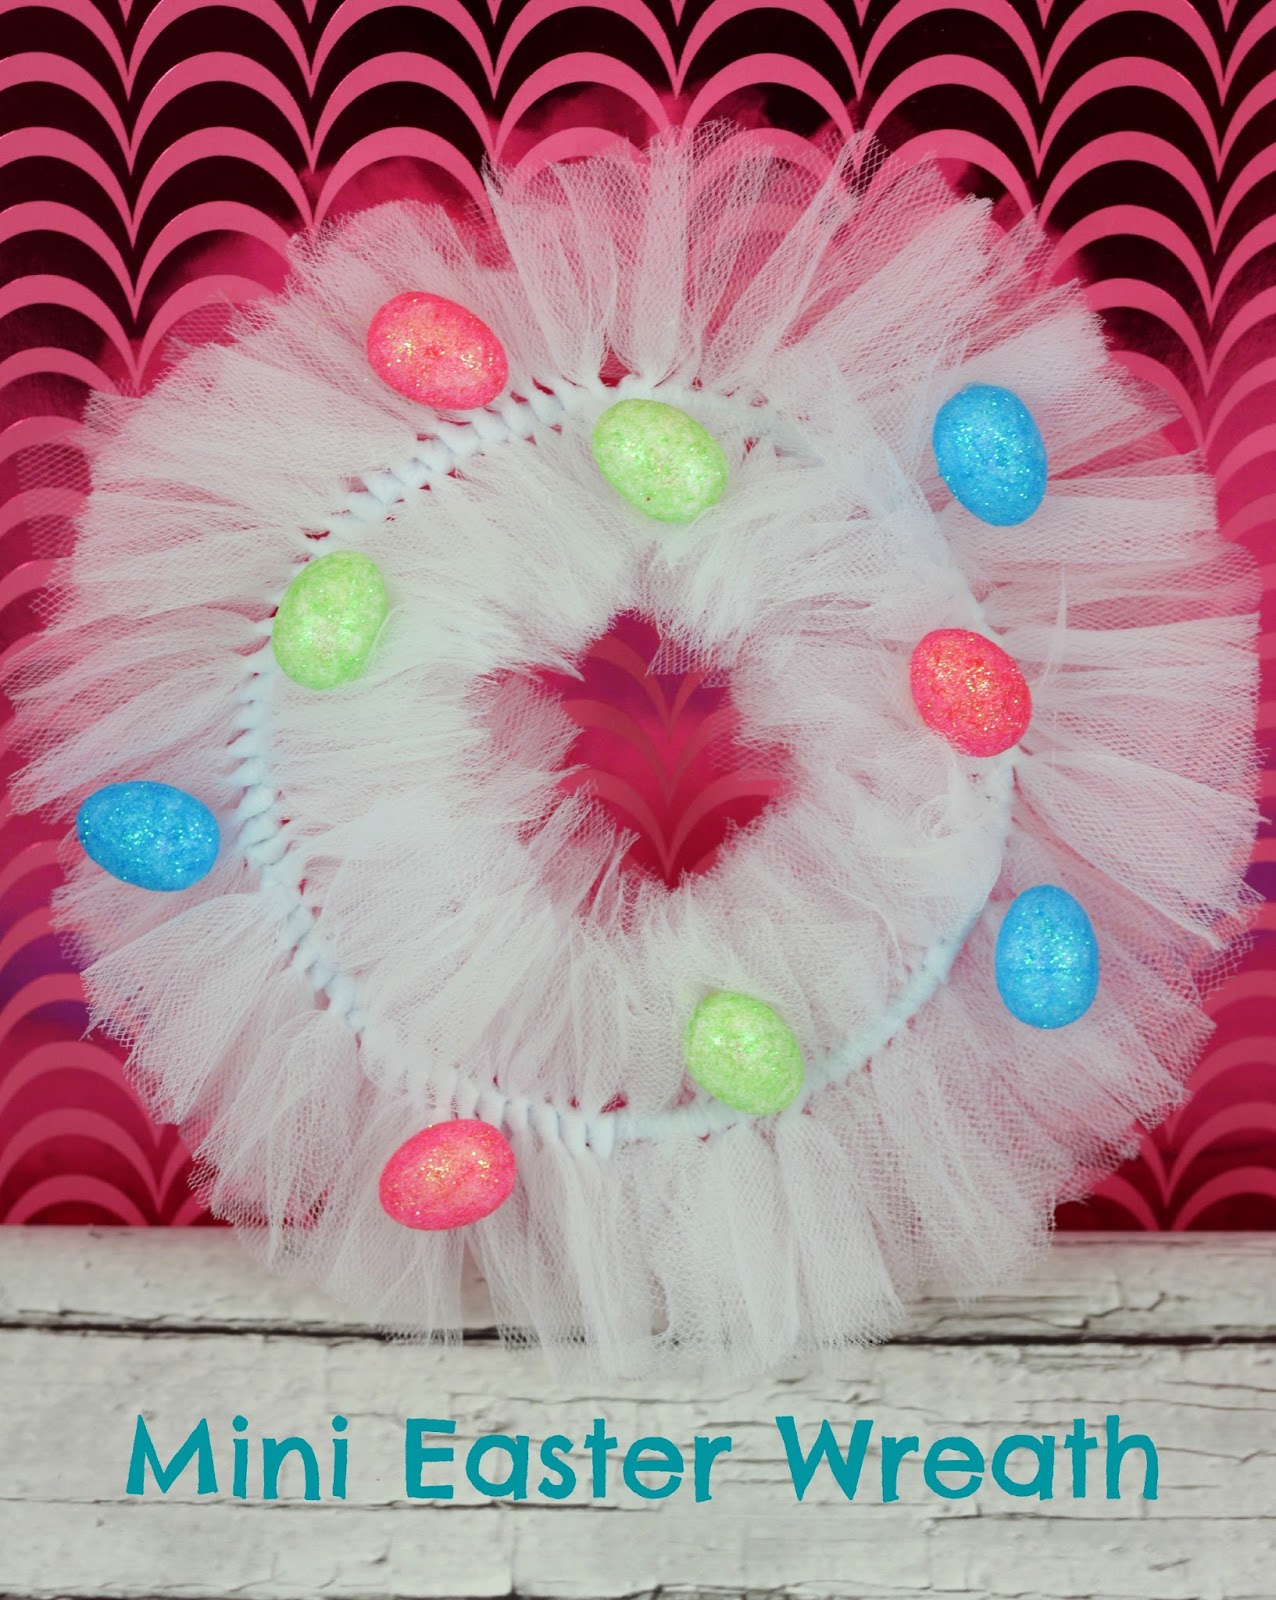 Mini #Spring Tulle #Wreath #DIY #crafts #Easter